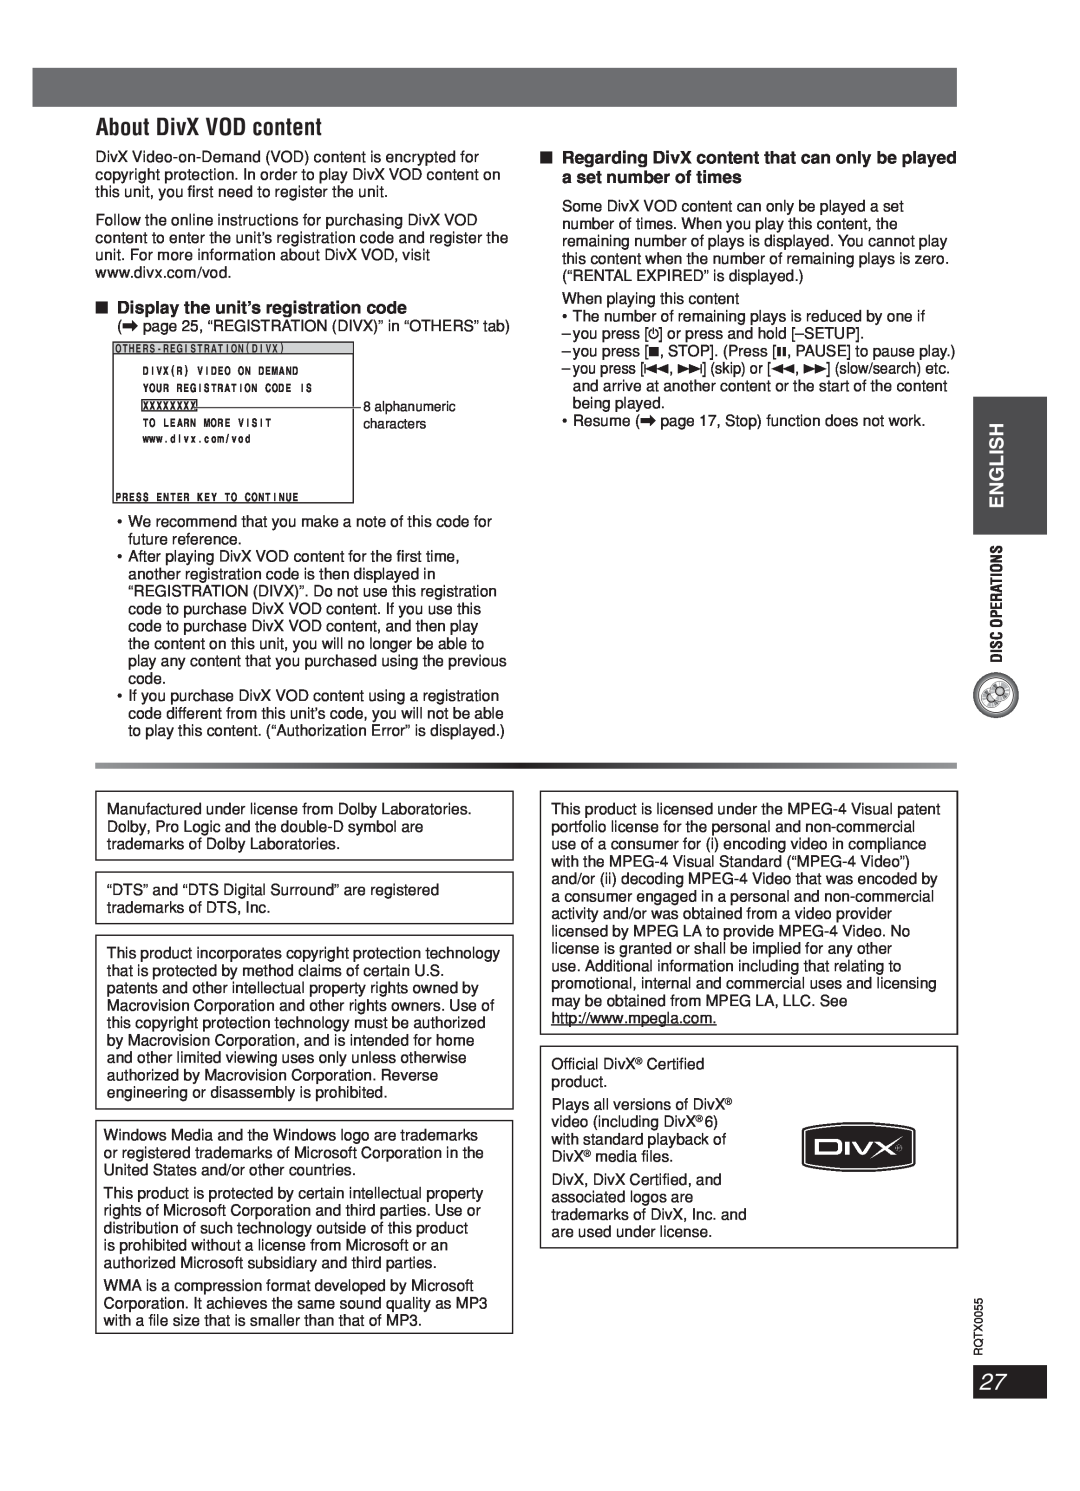 Panasonic SC-PT 250 manual About DivX VOD content, Display the unit’s registration code, Disc Operations English 